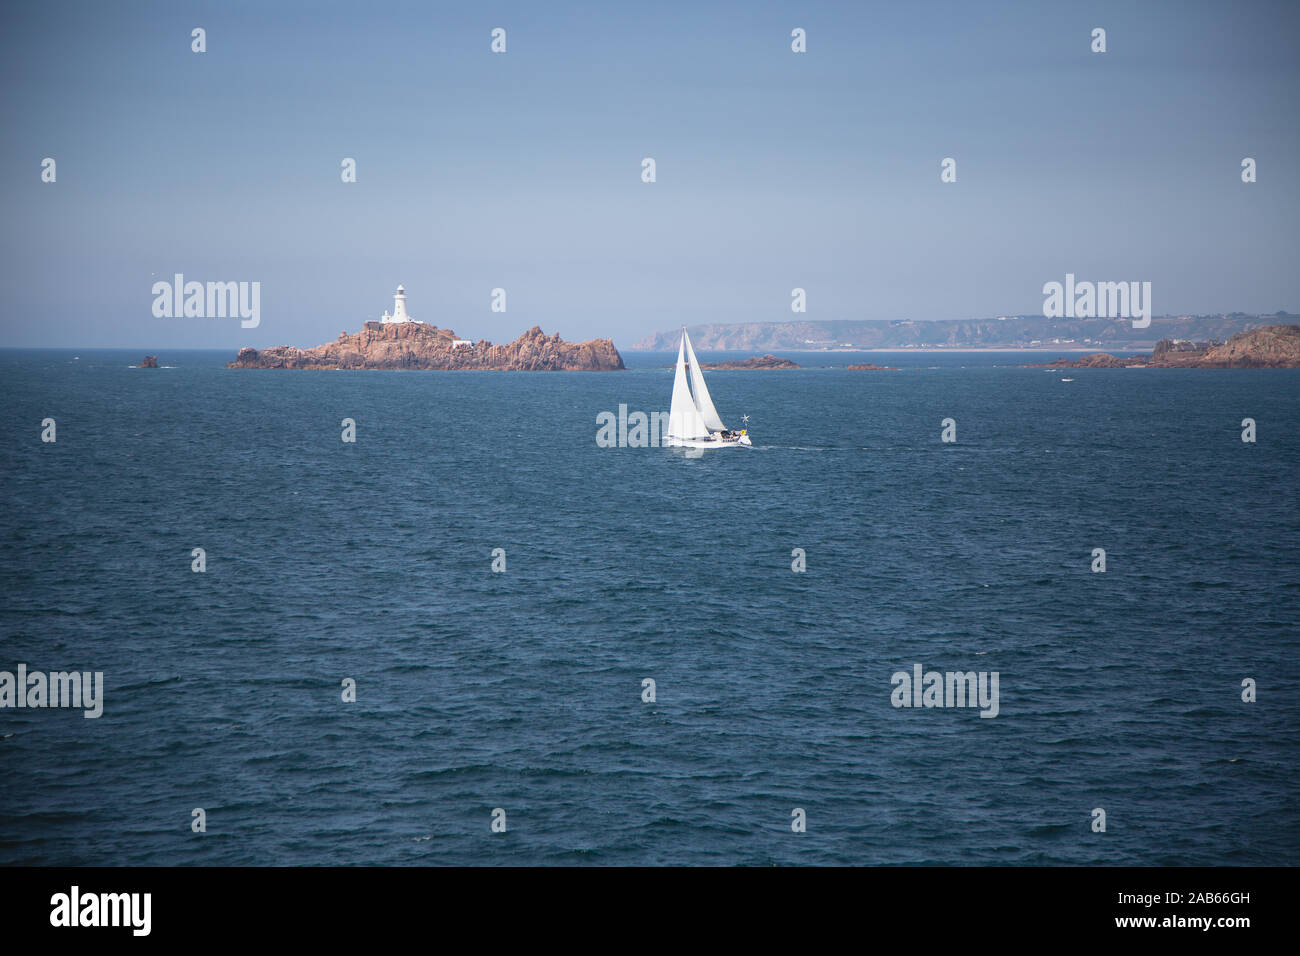 Sailing boat off the coast of Guernsey with a light house and rocks - channel islands Stock Photo